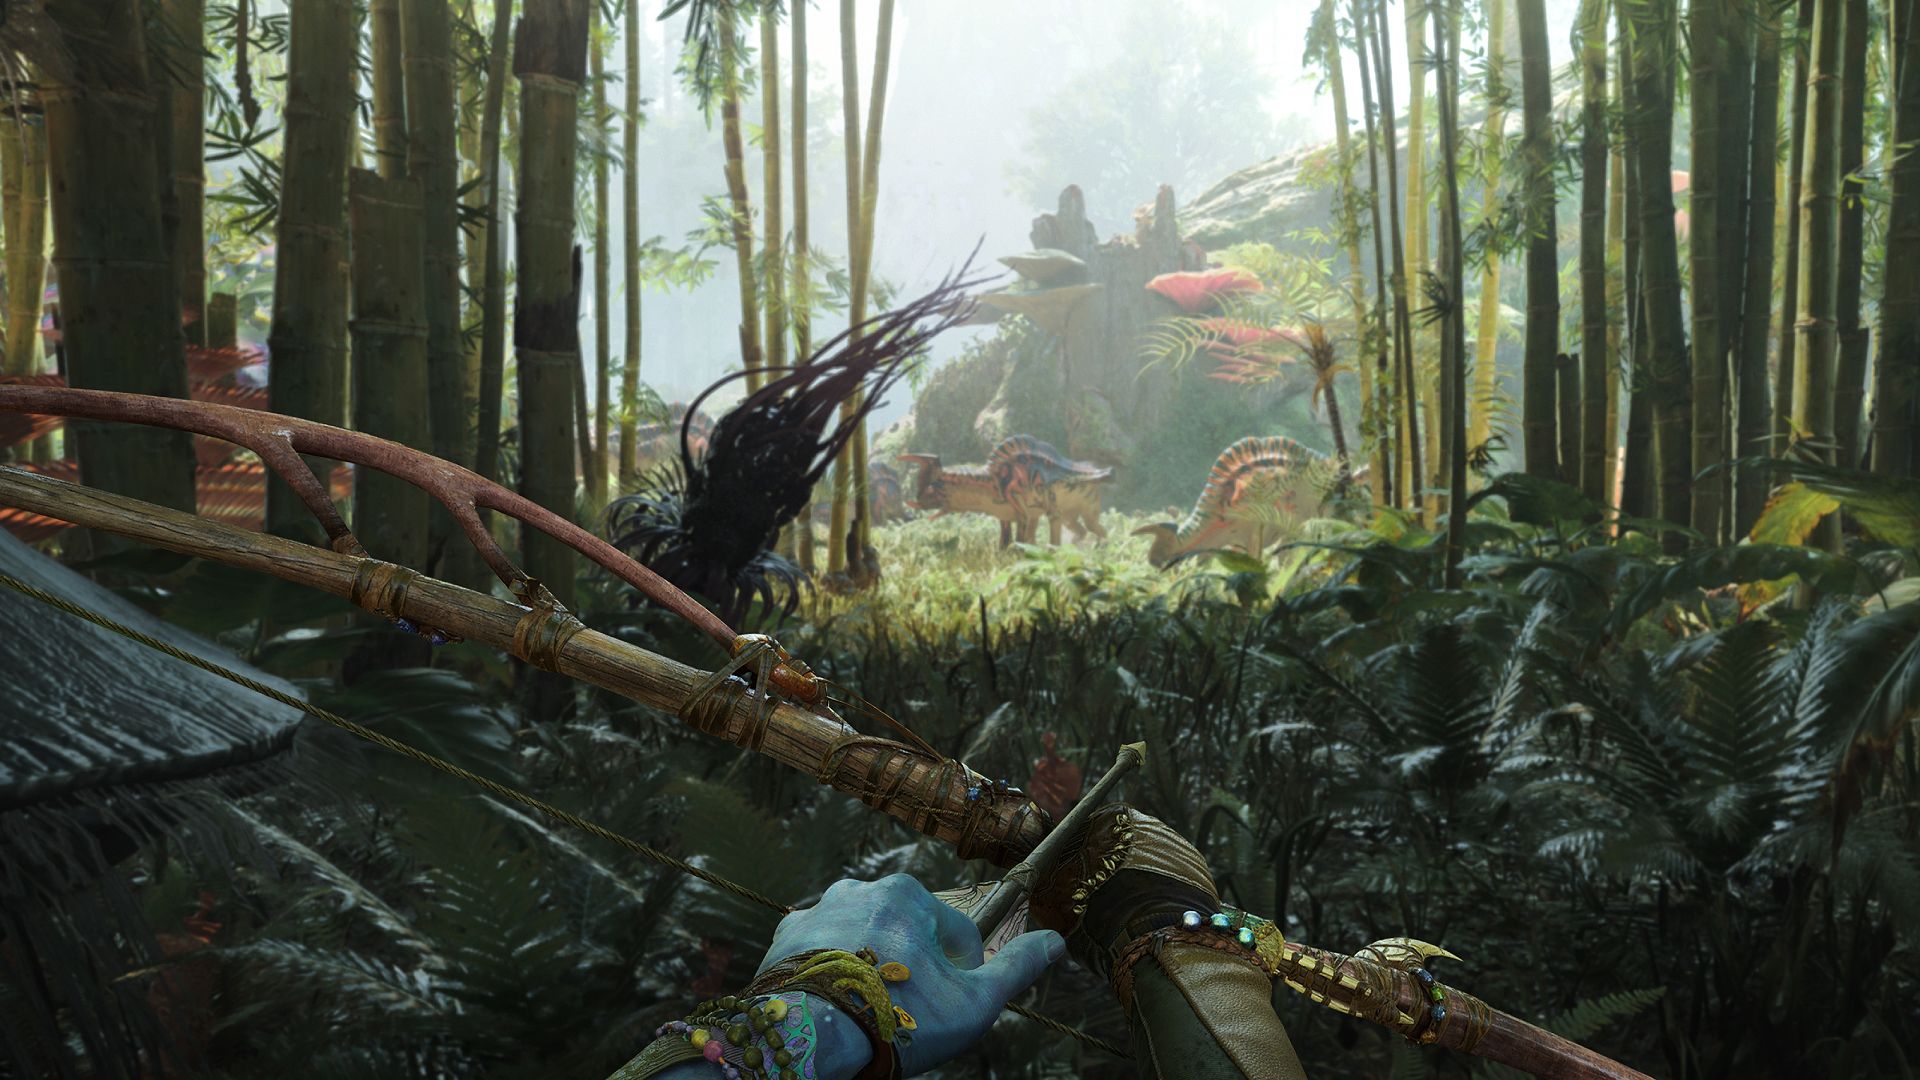 The player with a bow and arrow in Avatar: Frontiers of Pandora